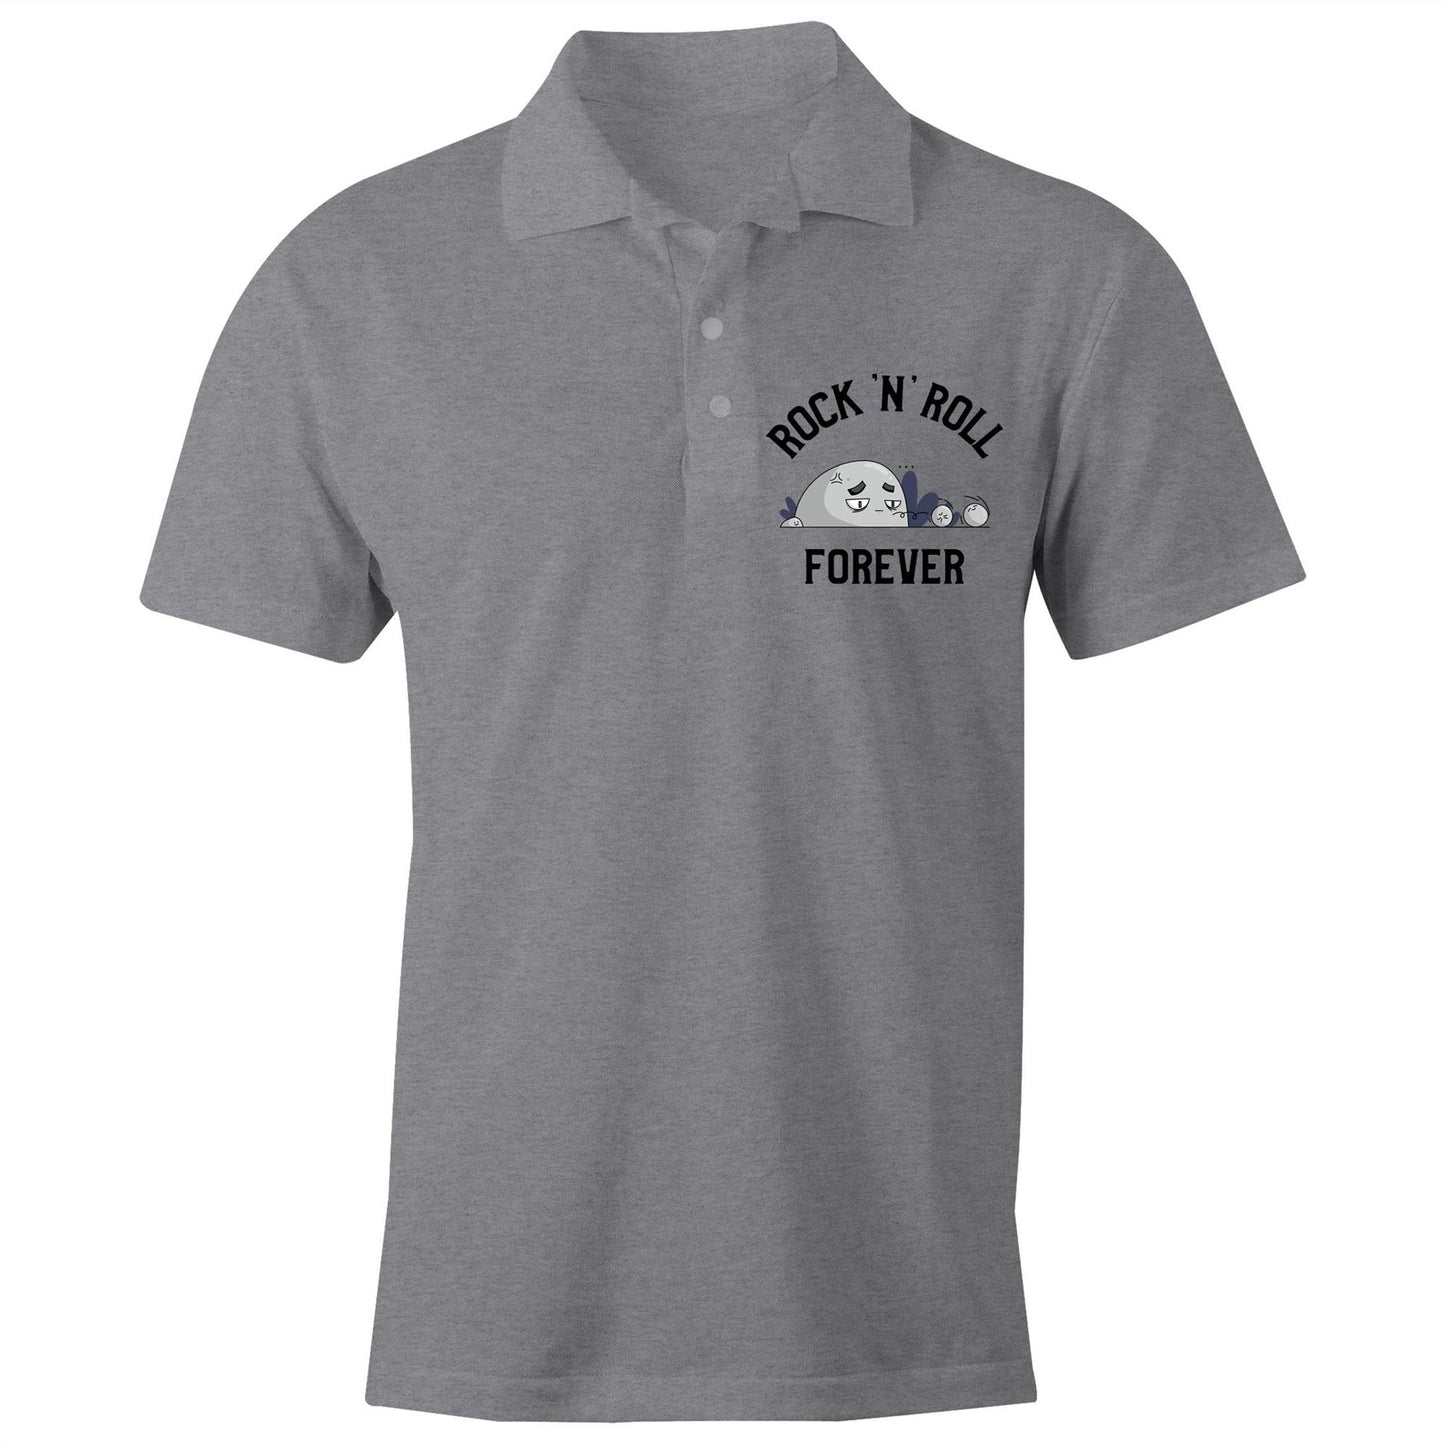 Rock 'N' Roll Forever - Chad S/S Polo Shirt, Printed Grey Marle Polo Shirt Music